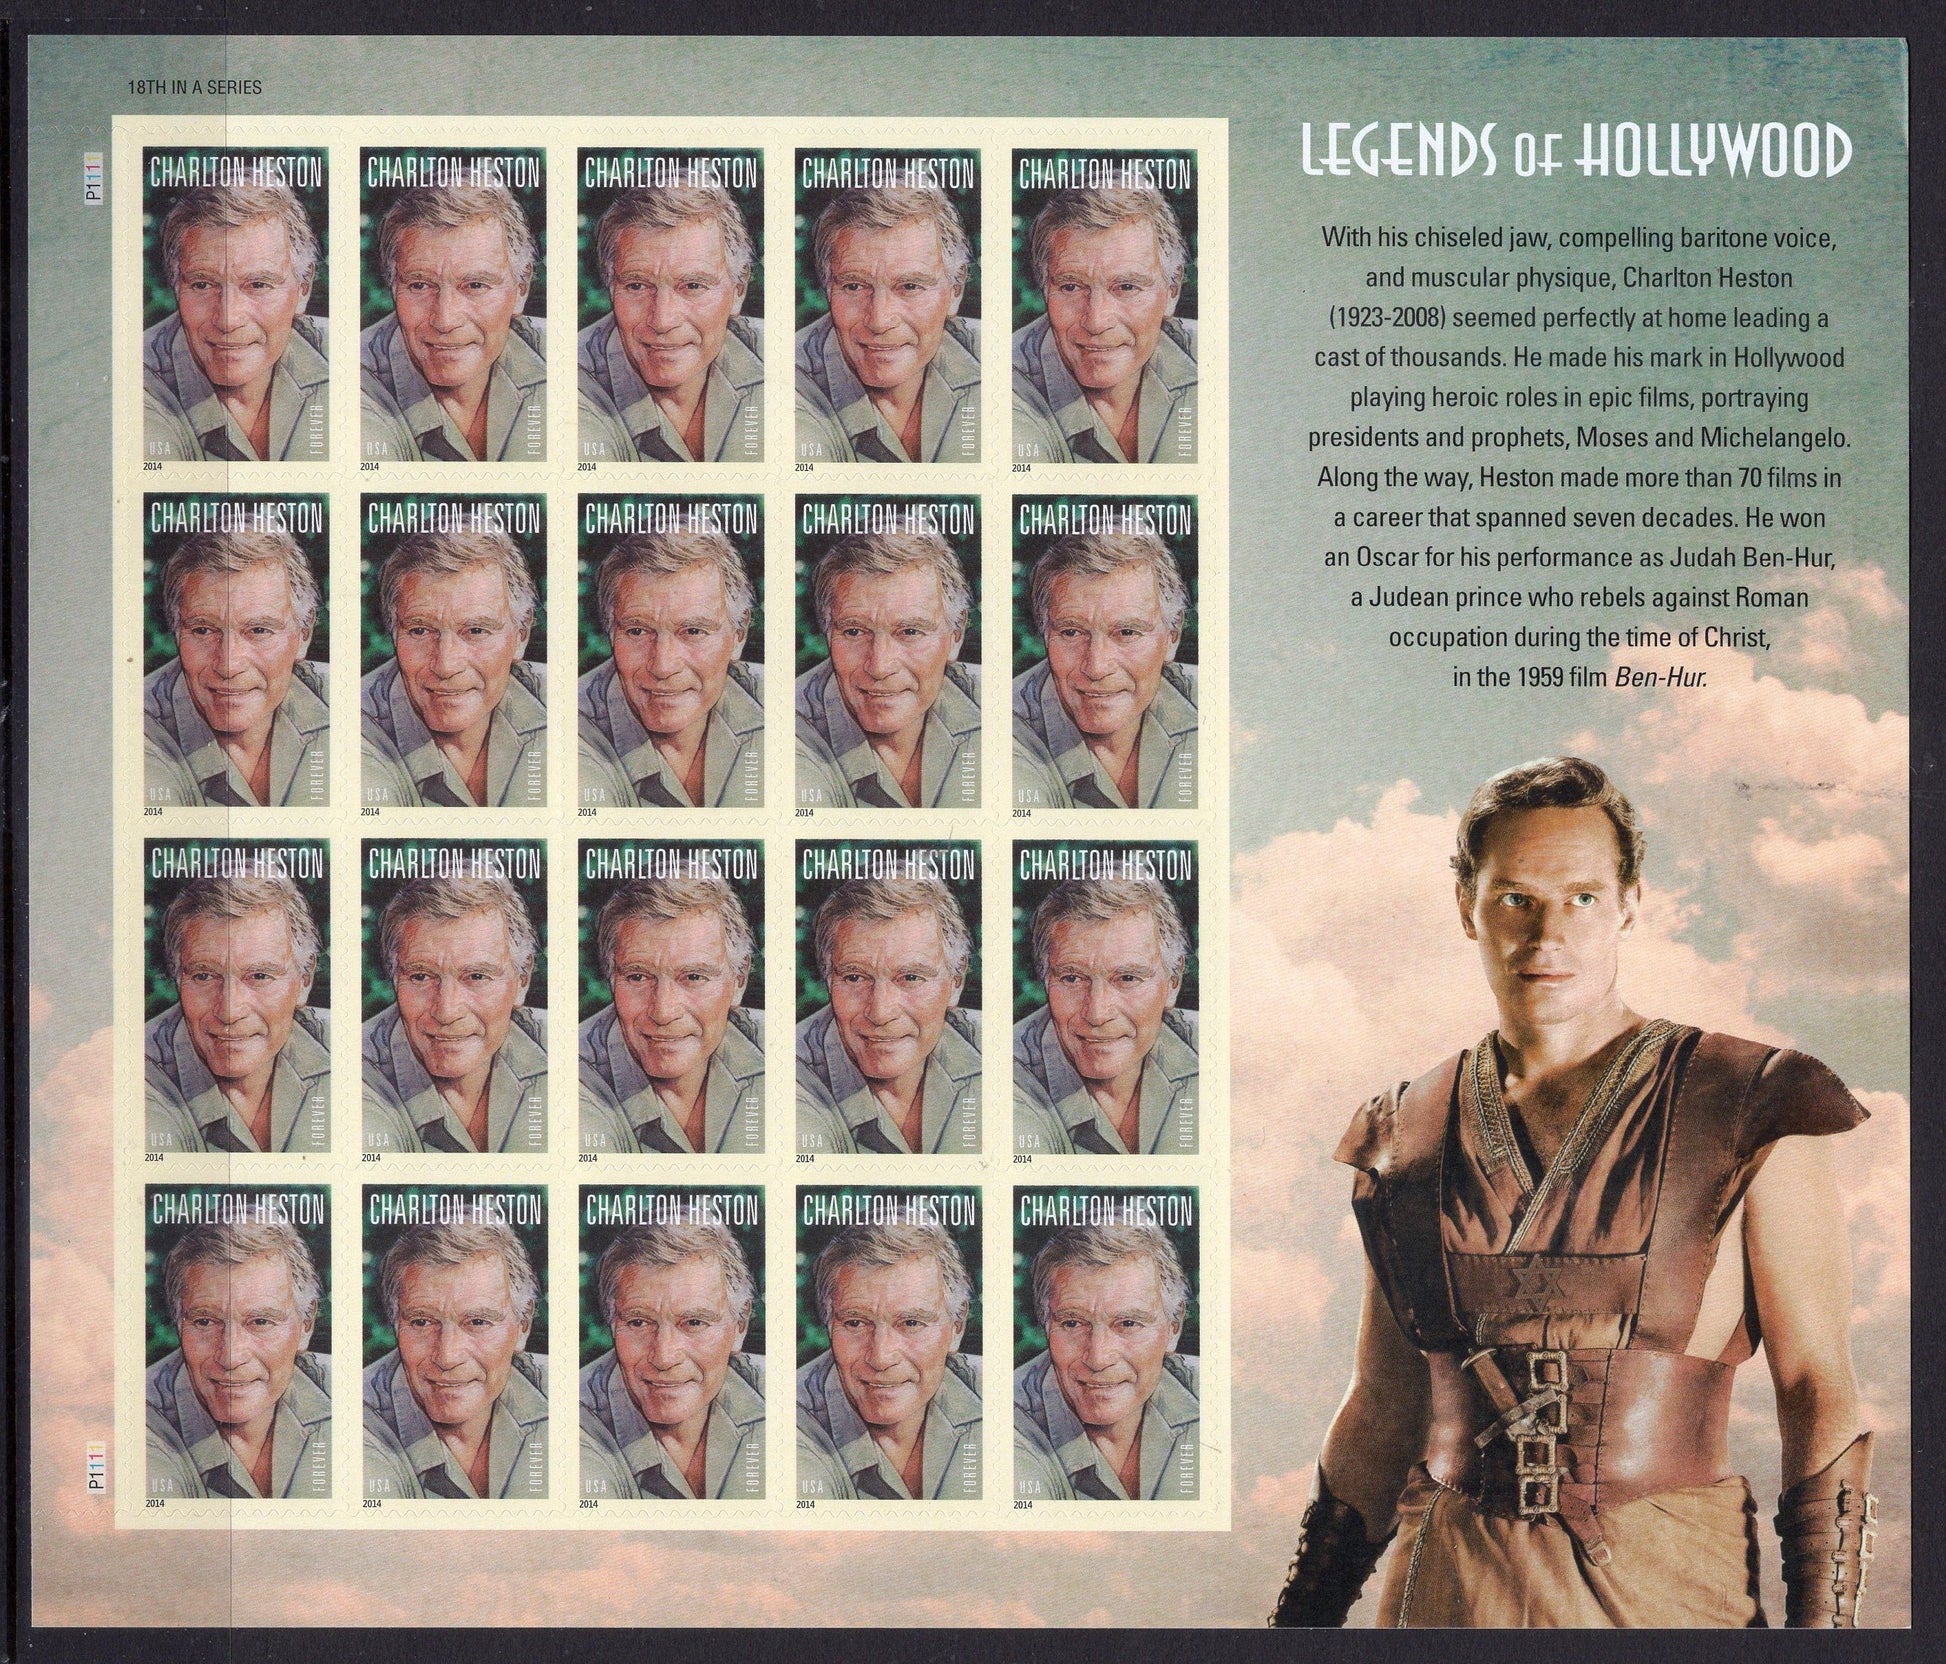 CHARLTON HESTON - LEGENDARY ACTOR - BEN HUR - SPECIAL DECORATIVE SHEET of 20 Stamps - A Great Gift